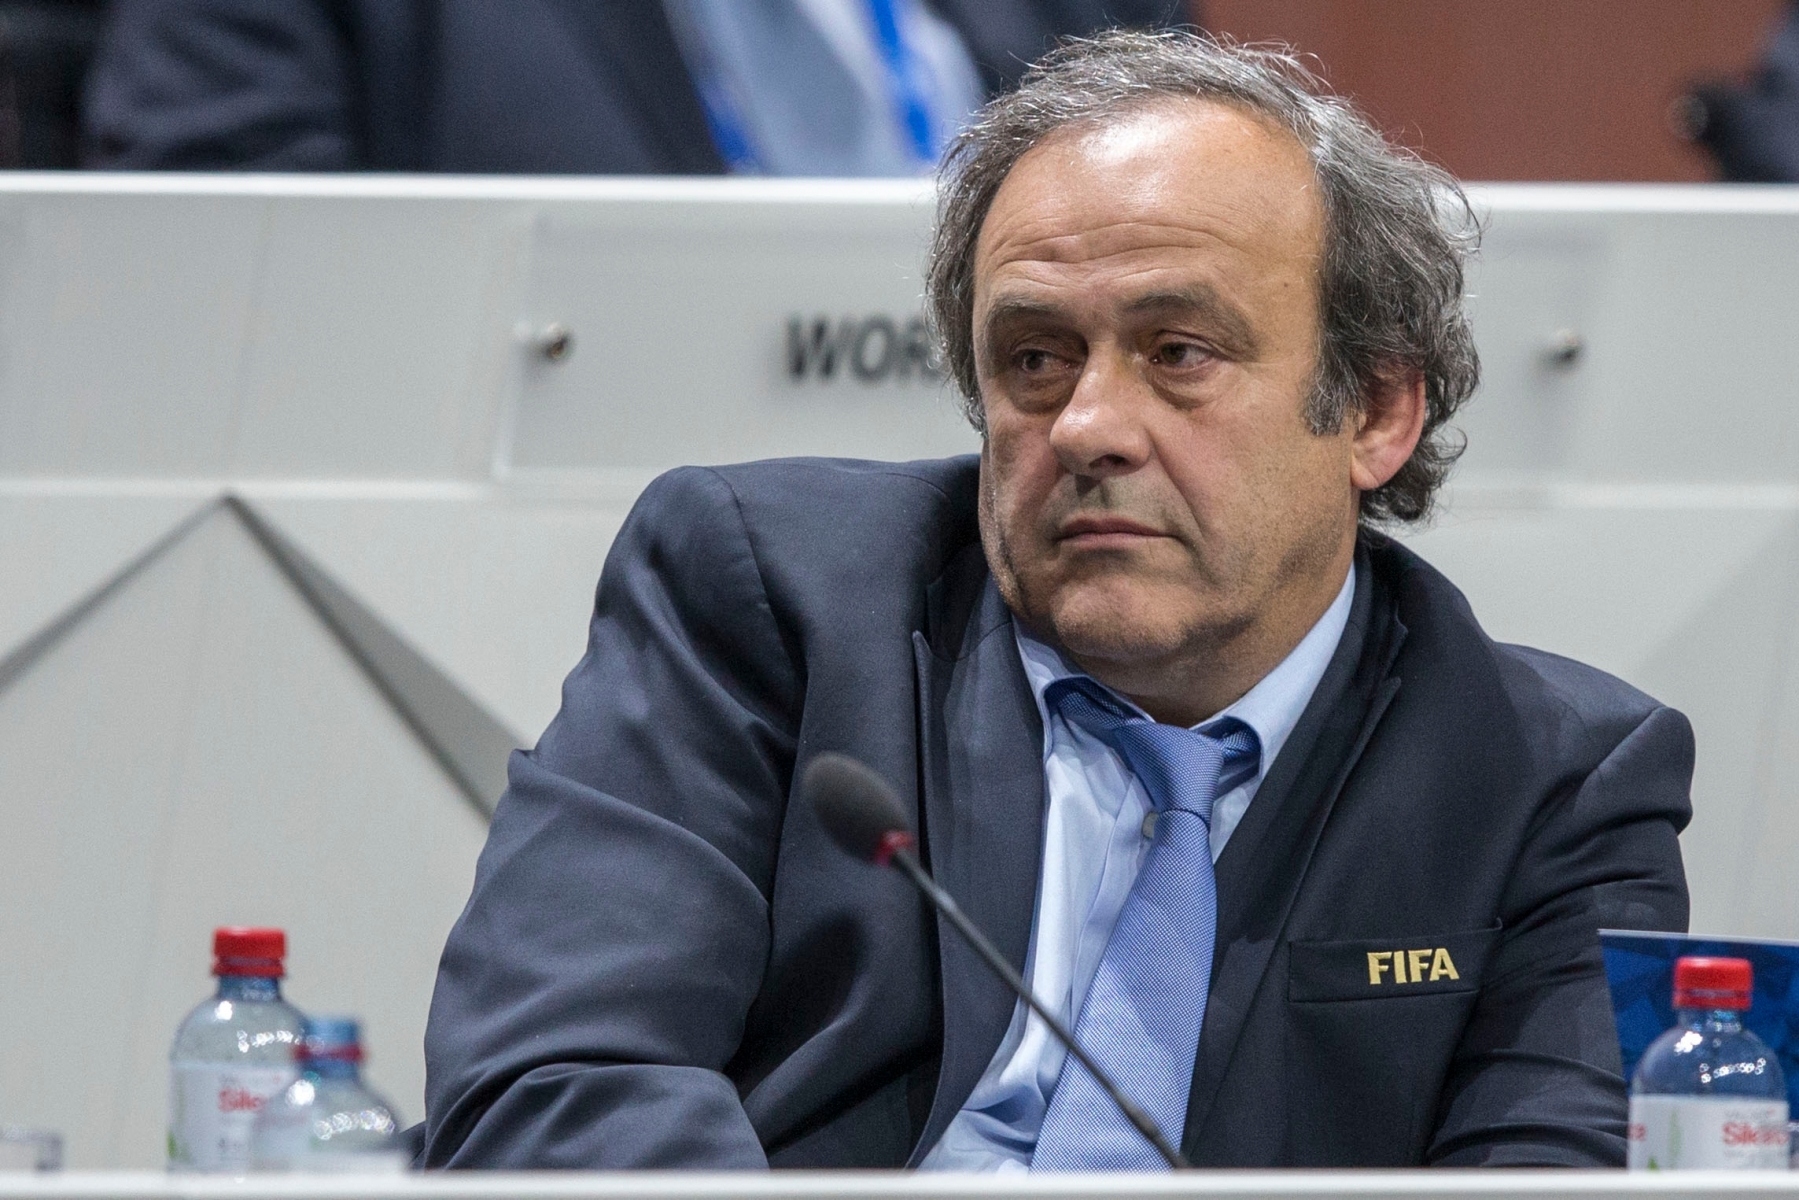 FIFA vice president and president of the UEFA Michel Platini reacts during the 65th FIFA Congress held at the Hallenstadion in Zurich, Switzerland, Friday, May 29, 2015. (KEYSTONE/Patrick B. Kraemer)t SCHWEIZ FUSSBALL FIFA KONGRESS 2015